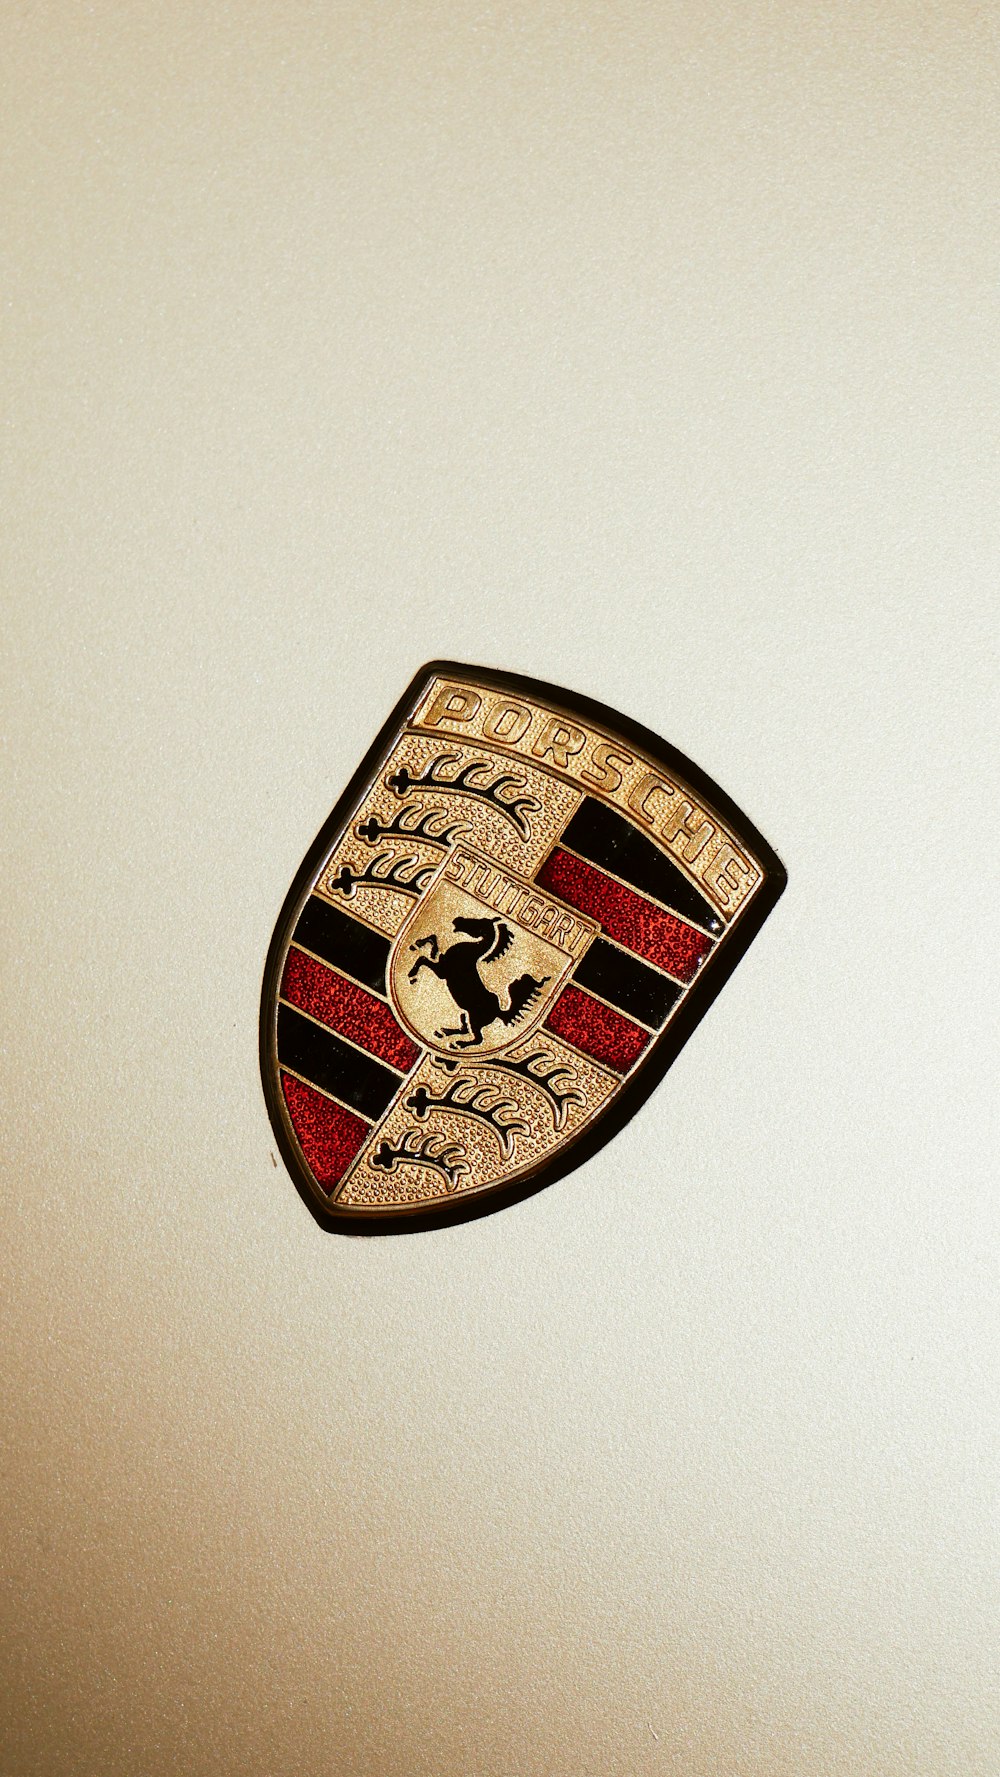 a close up of a badge on a car